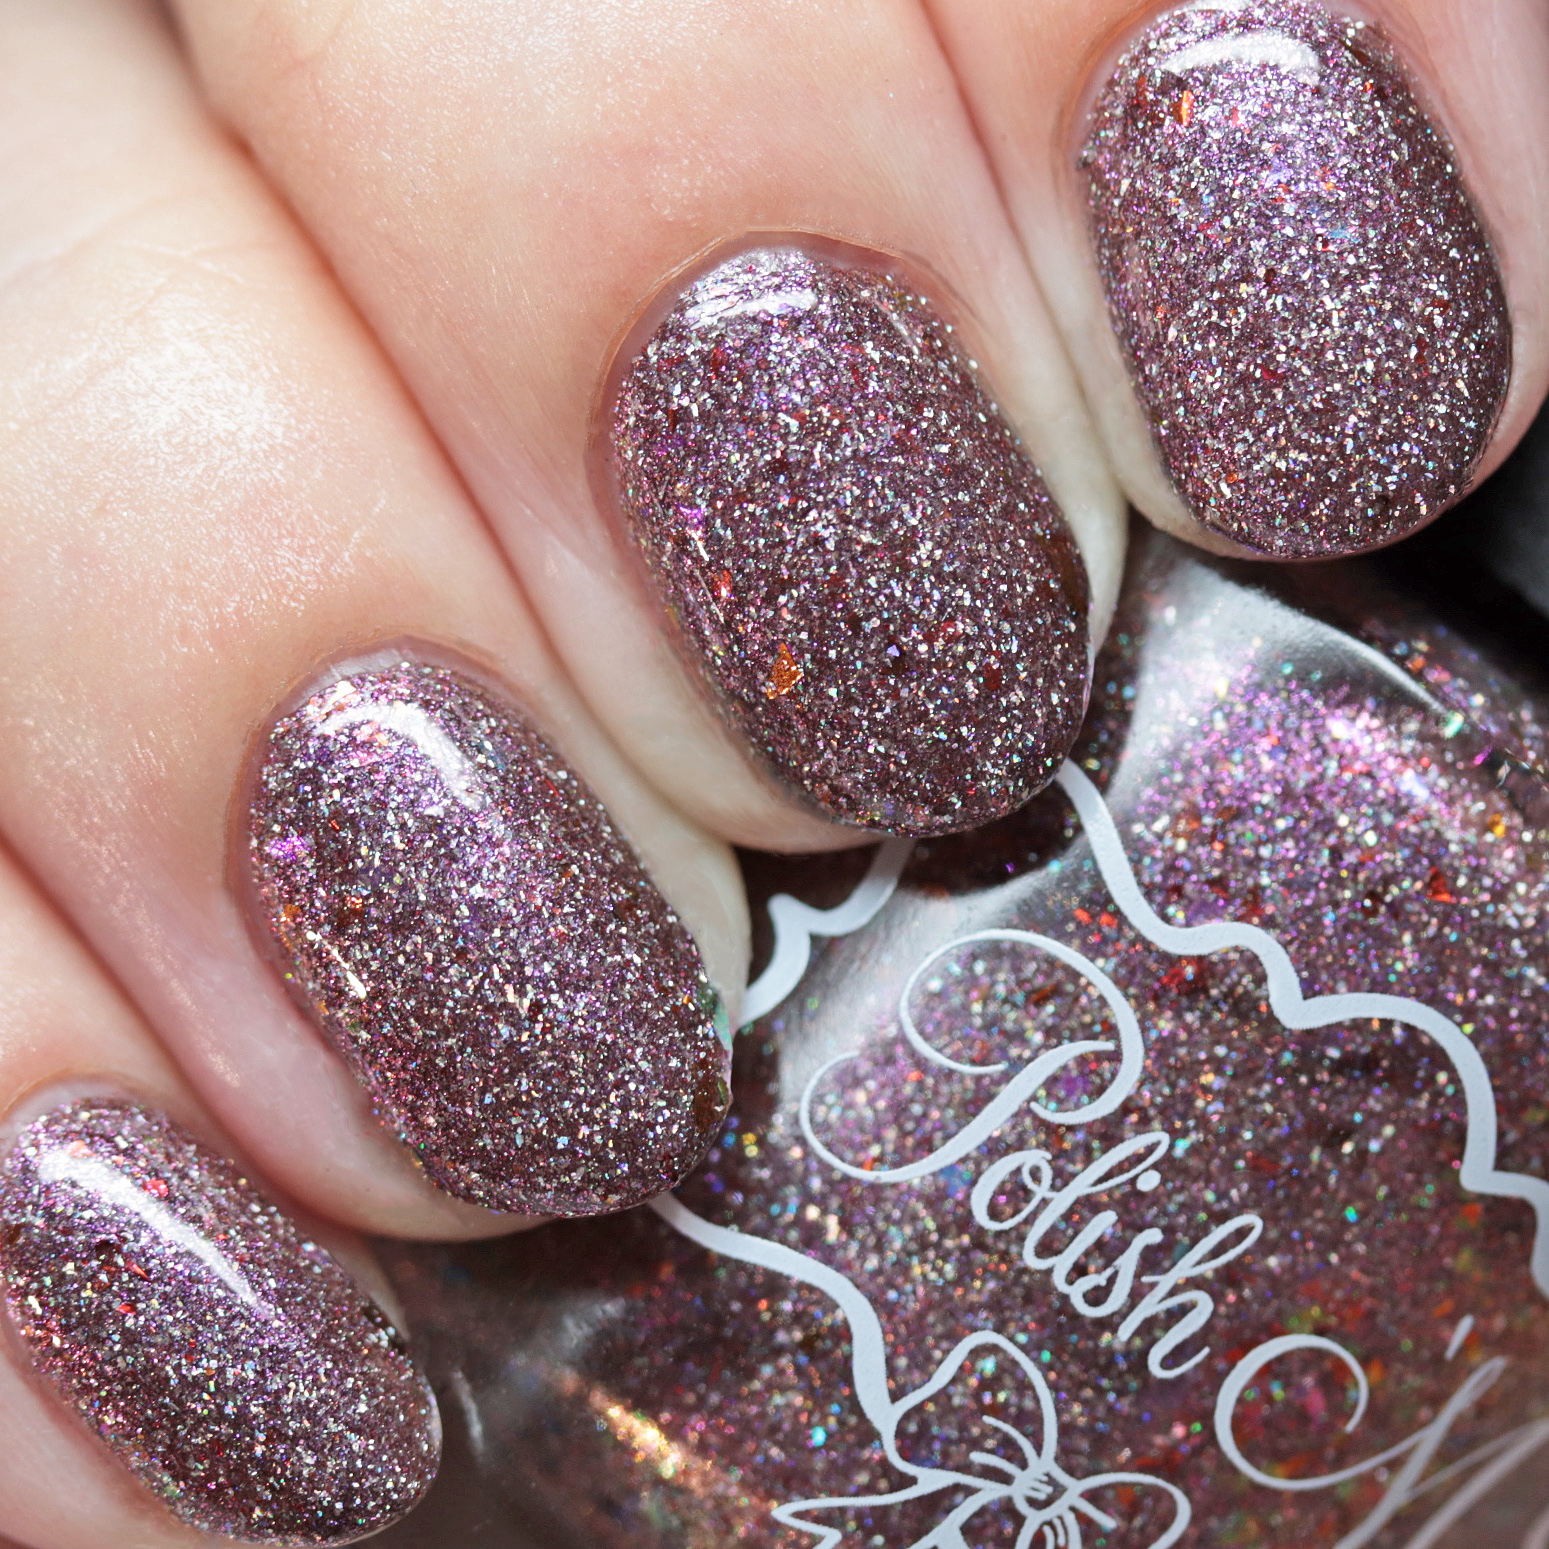 The Polished Hippy: Polish 'M Route 66 Collection Swatches and Review